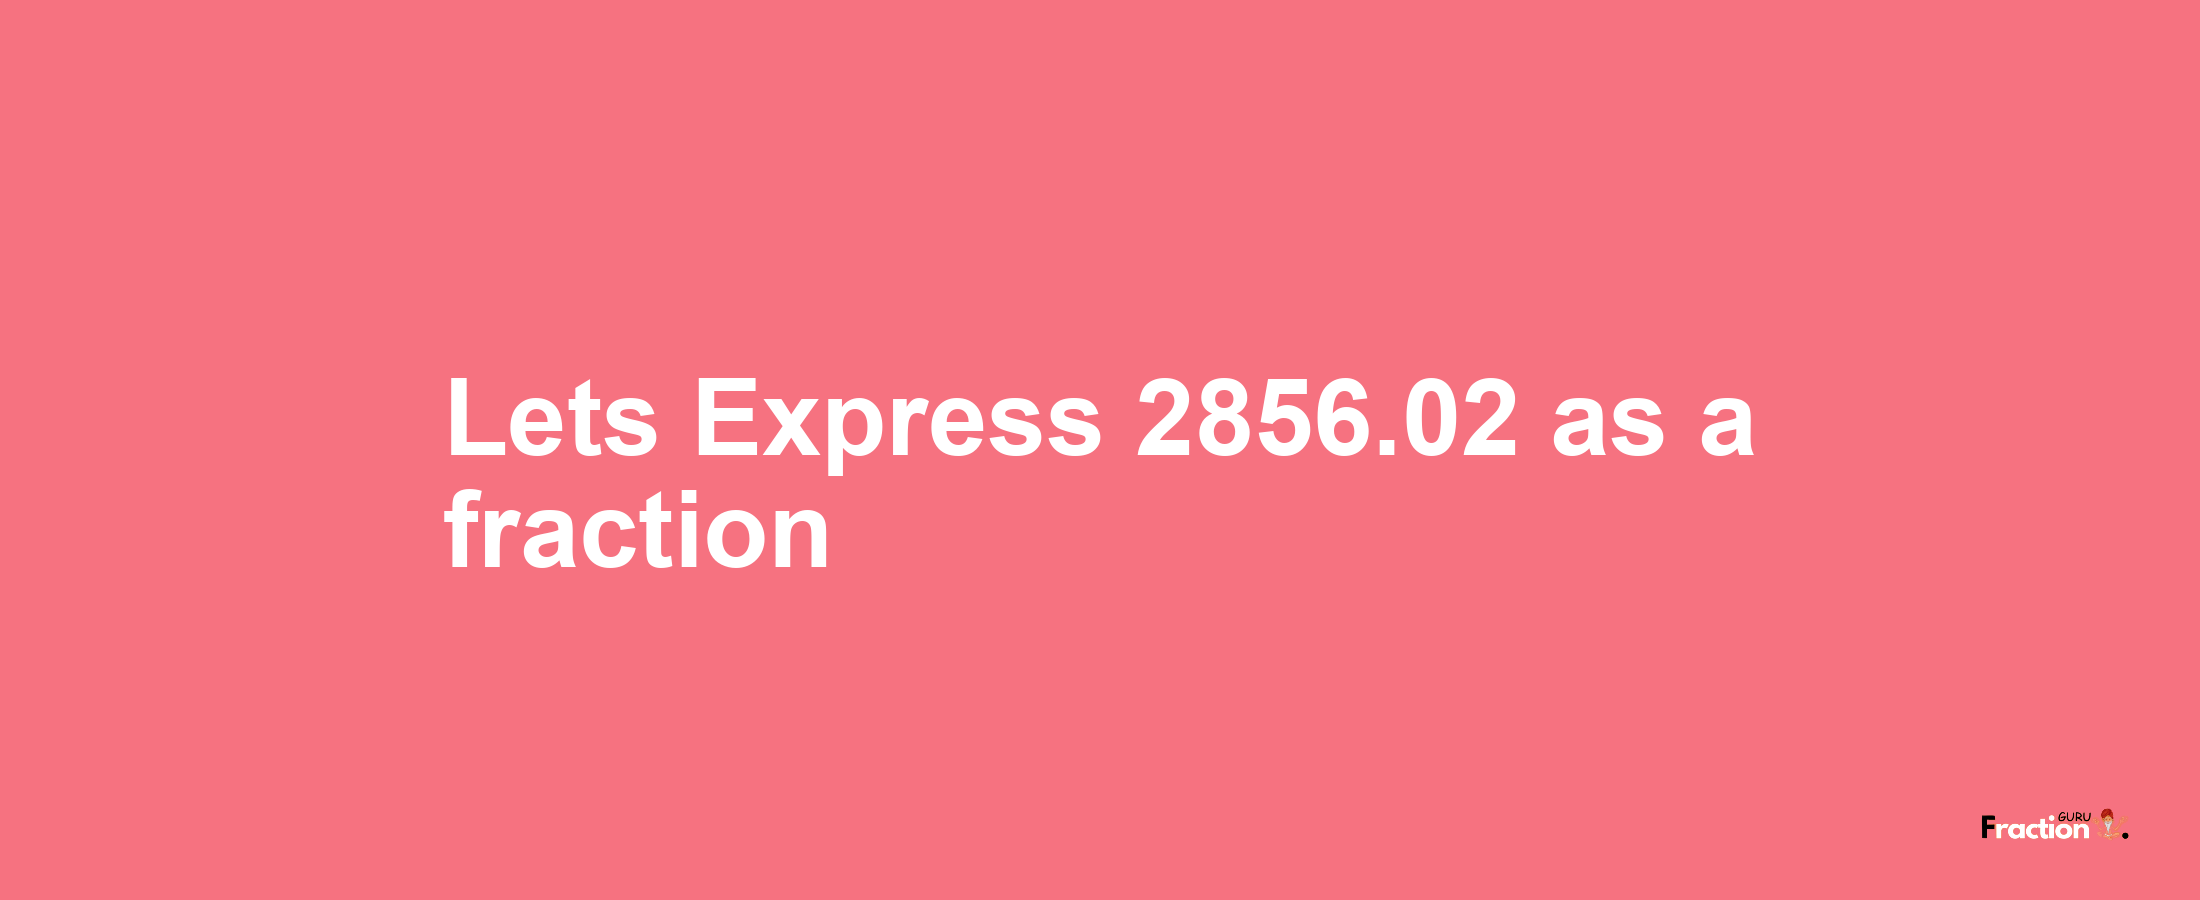 Lets Express 2856.02 as afraction